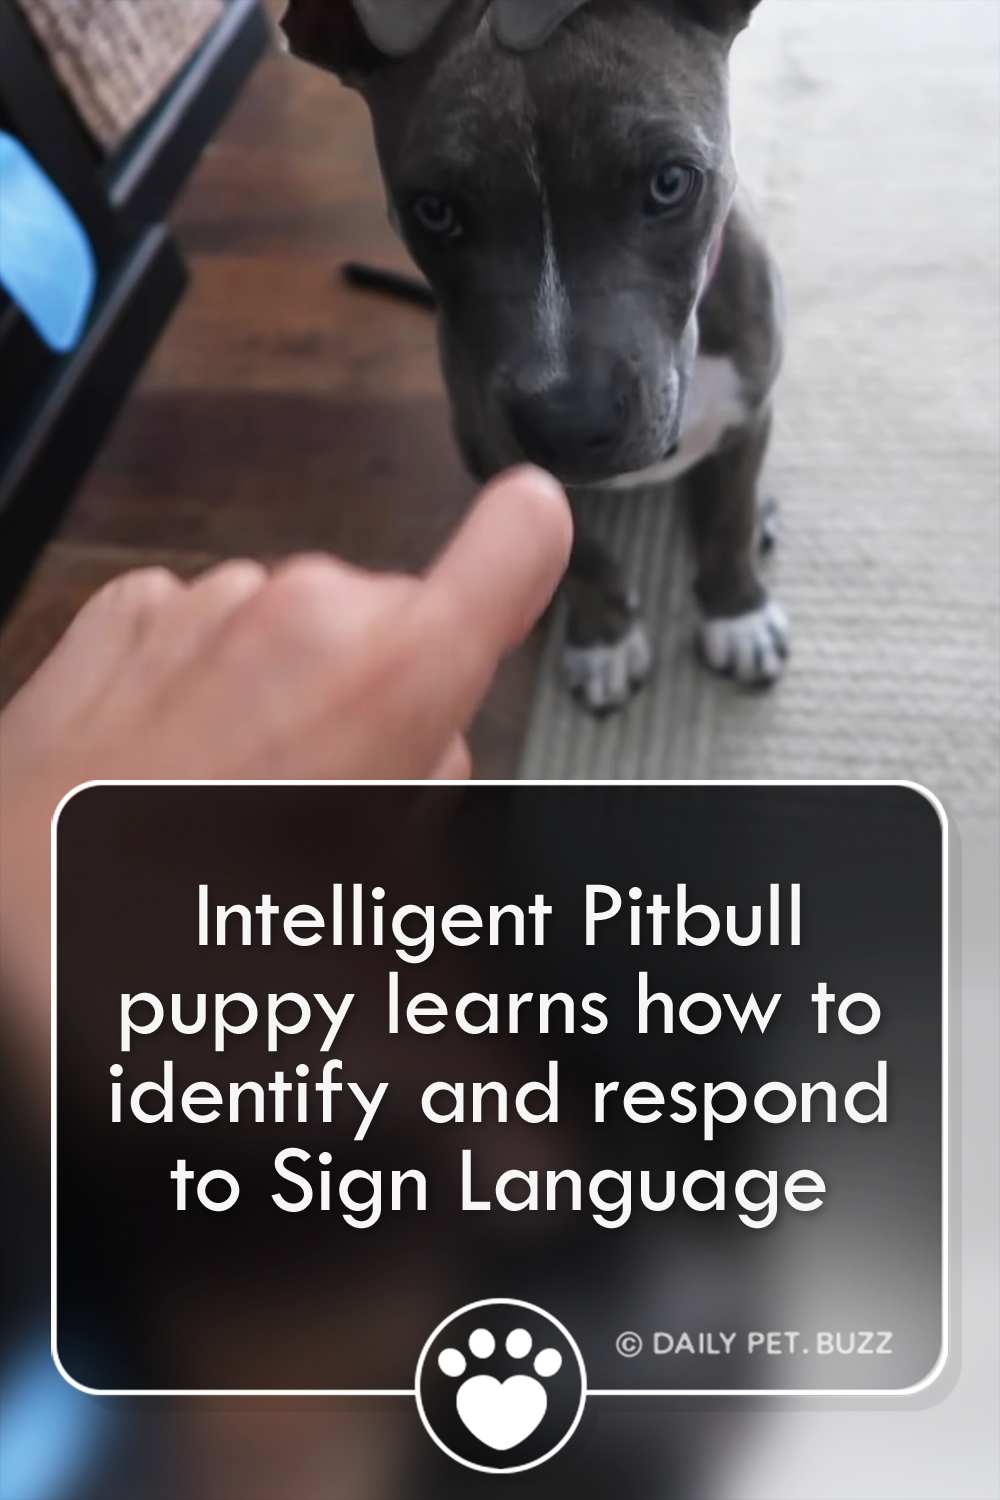 Intelligent Pitbull puppy learns how to identify and respond to Sign Language